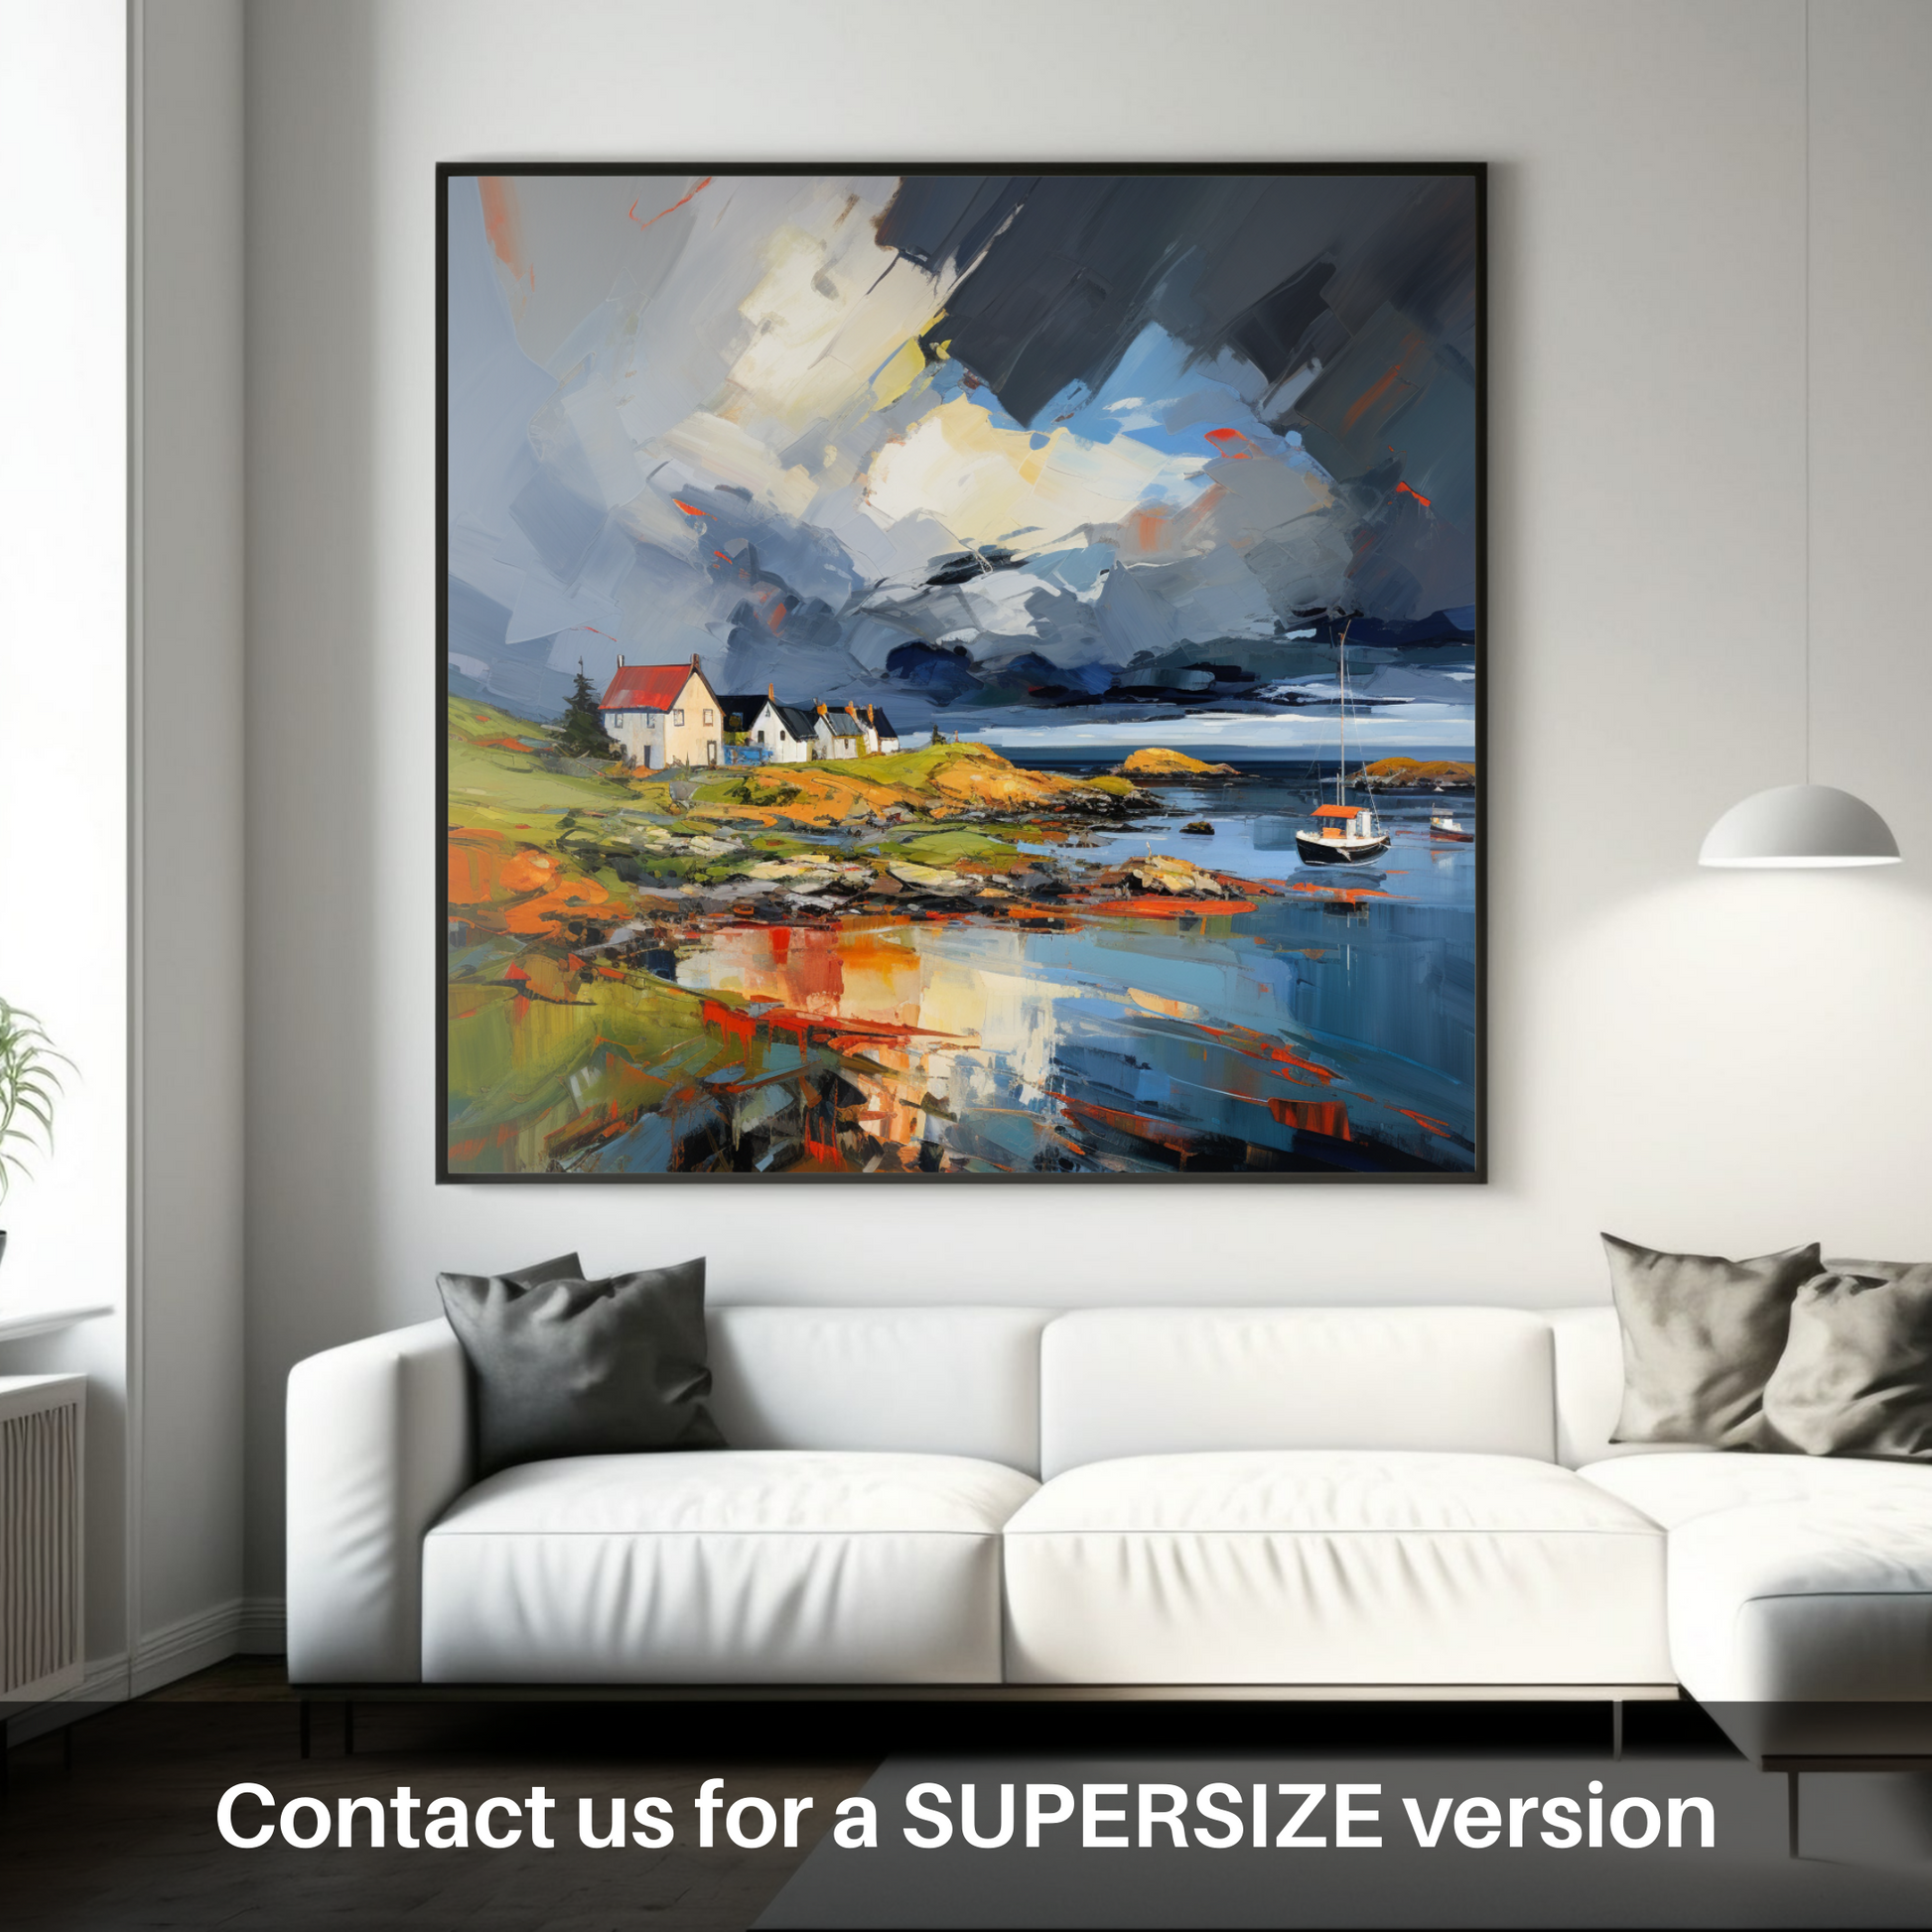 Huge supersize print of Gairloch Harbour with a stormy sky